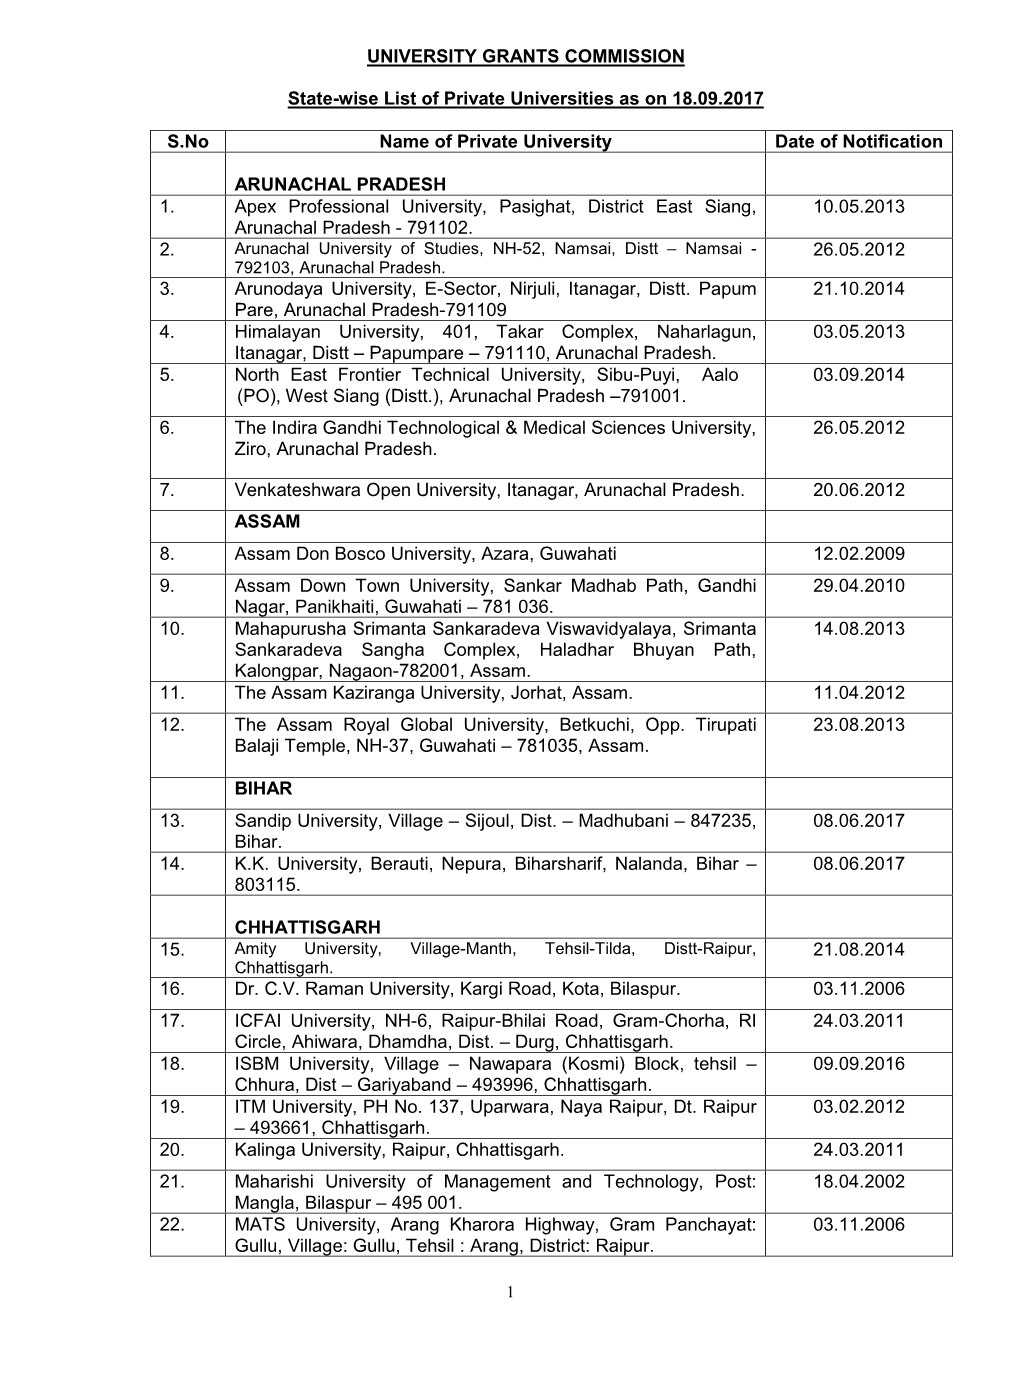 State -Wise List of Private Universities As on 19.09.2017